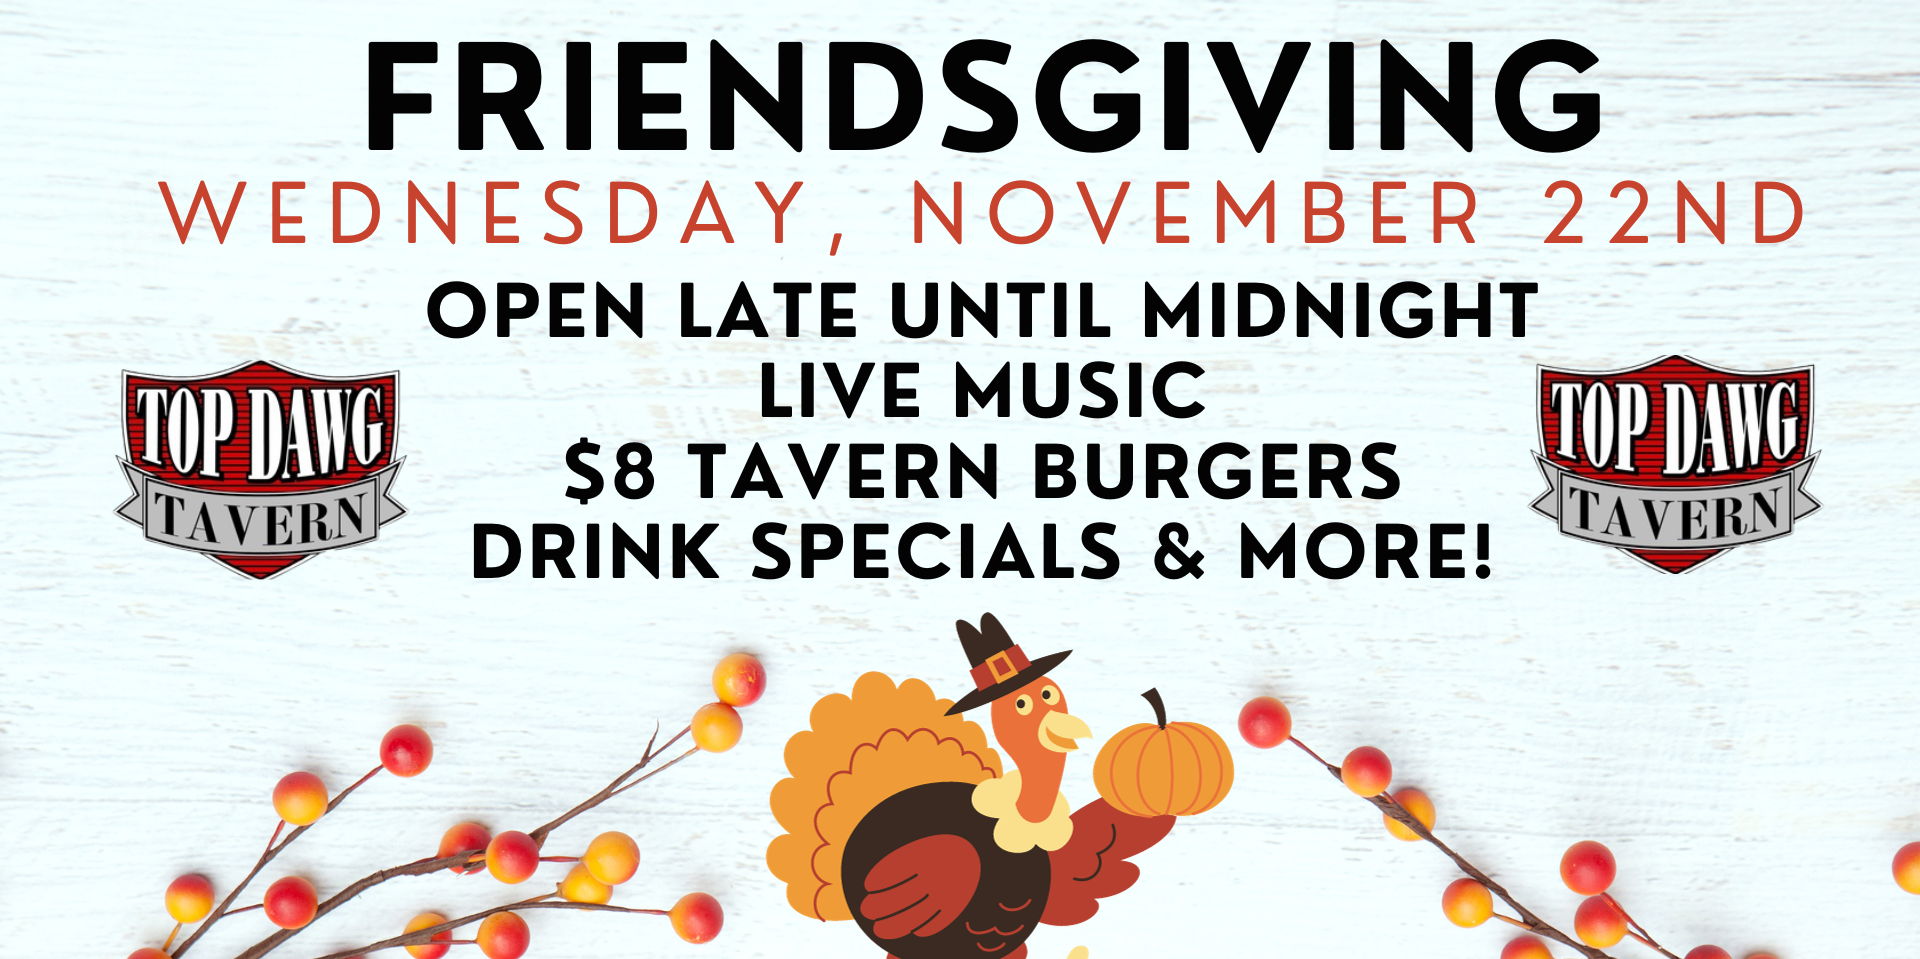 Friendsgiving at Top Dawg Tavern promotional image